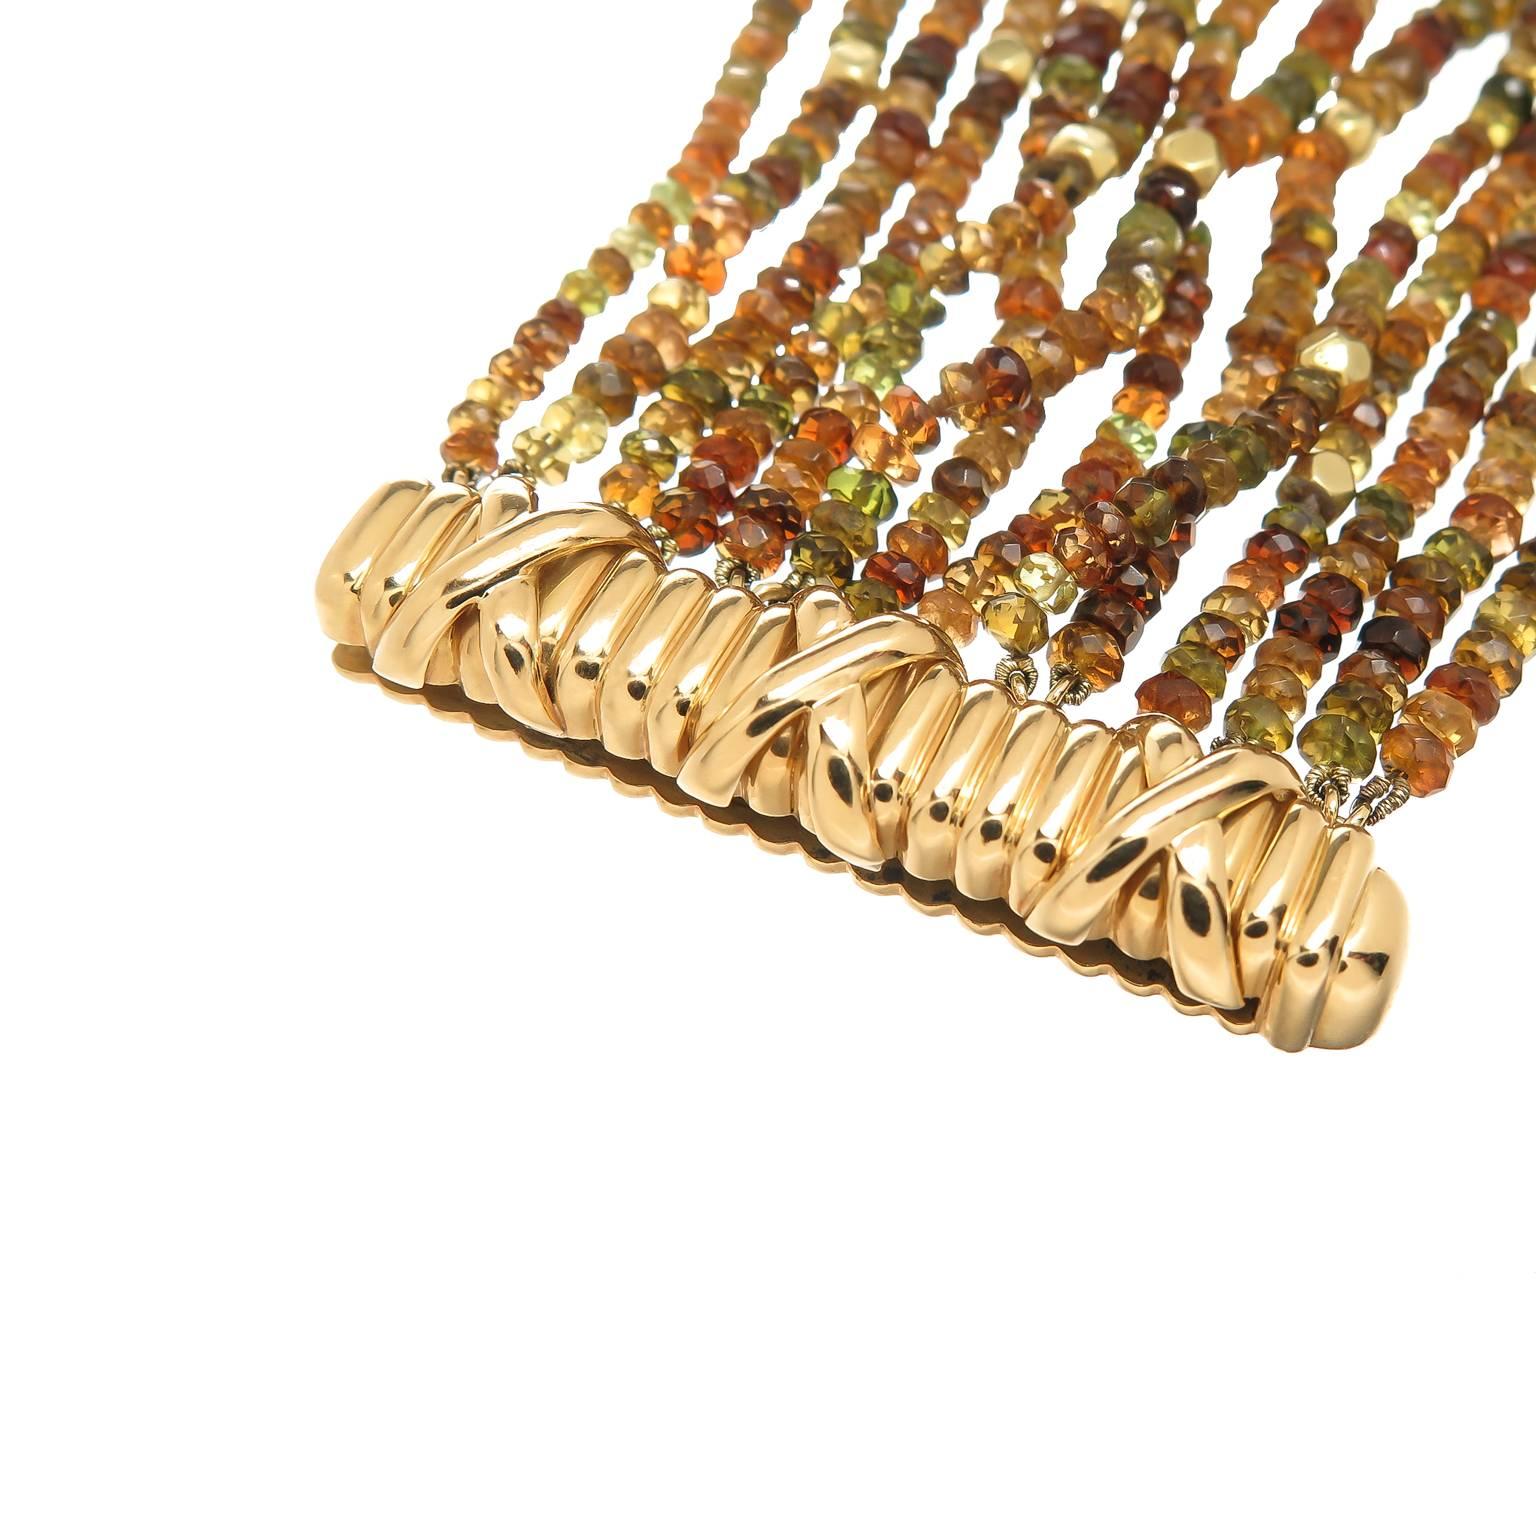 Circa 2000 Verdura 18K yellow Gold and Gemstone Bead Bracelet, having 14 Rows of faceted Roundel Citrine and Peridot  Beads and further accented with Gold faceted Beads, measuring 7 3/4 inch in length and 2 1/8 inch wide. Comes in original Verdura